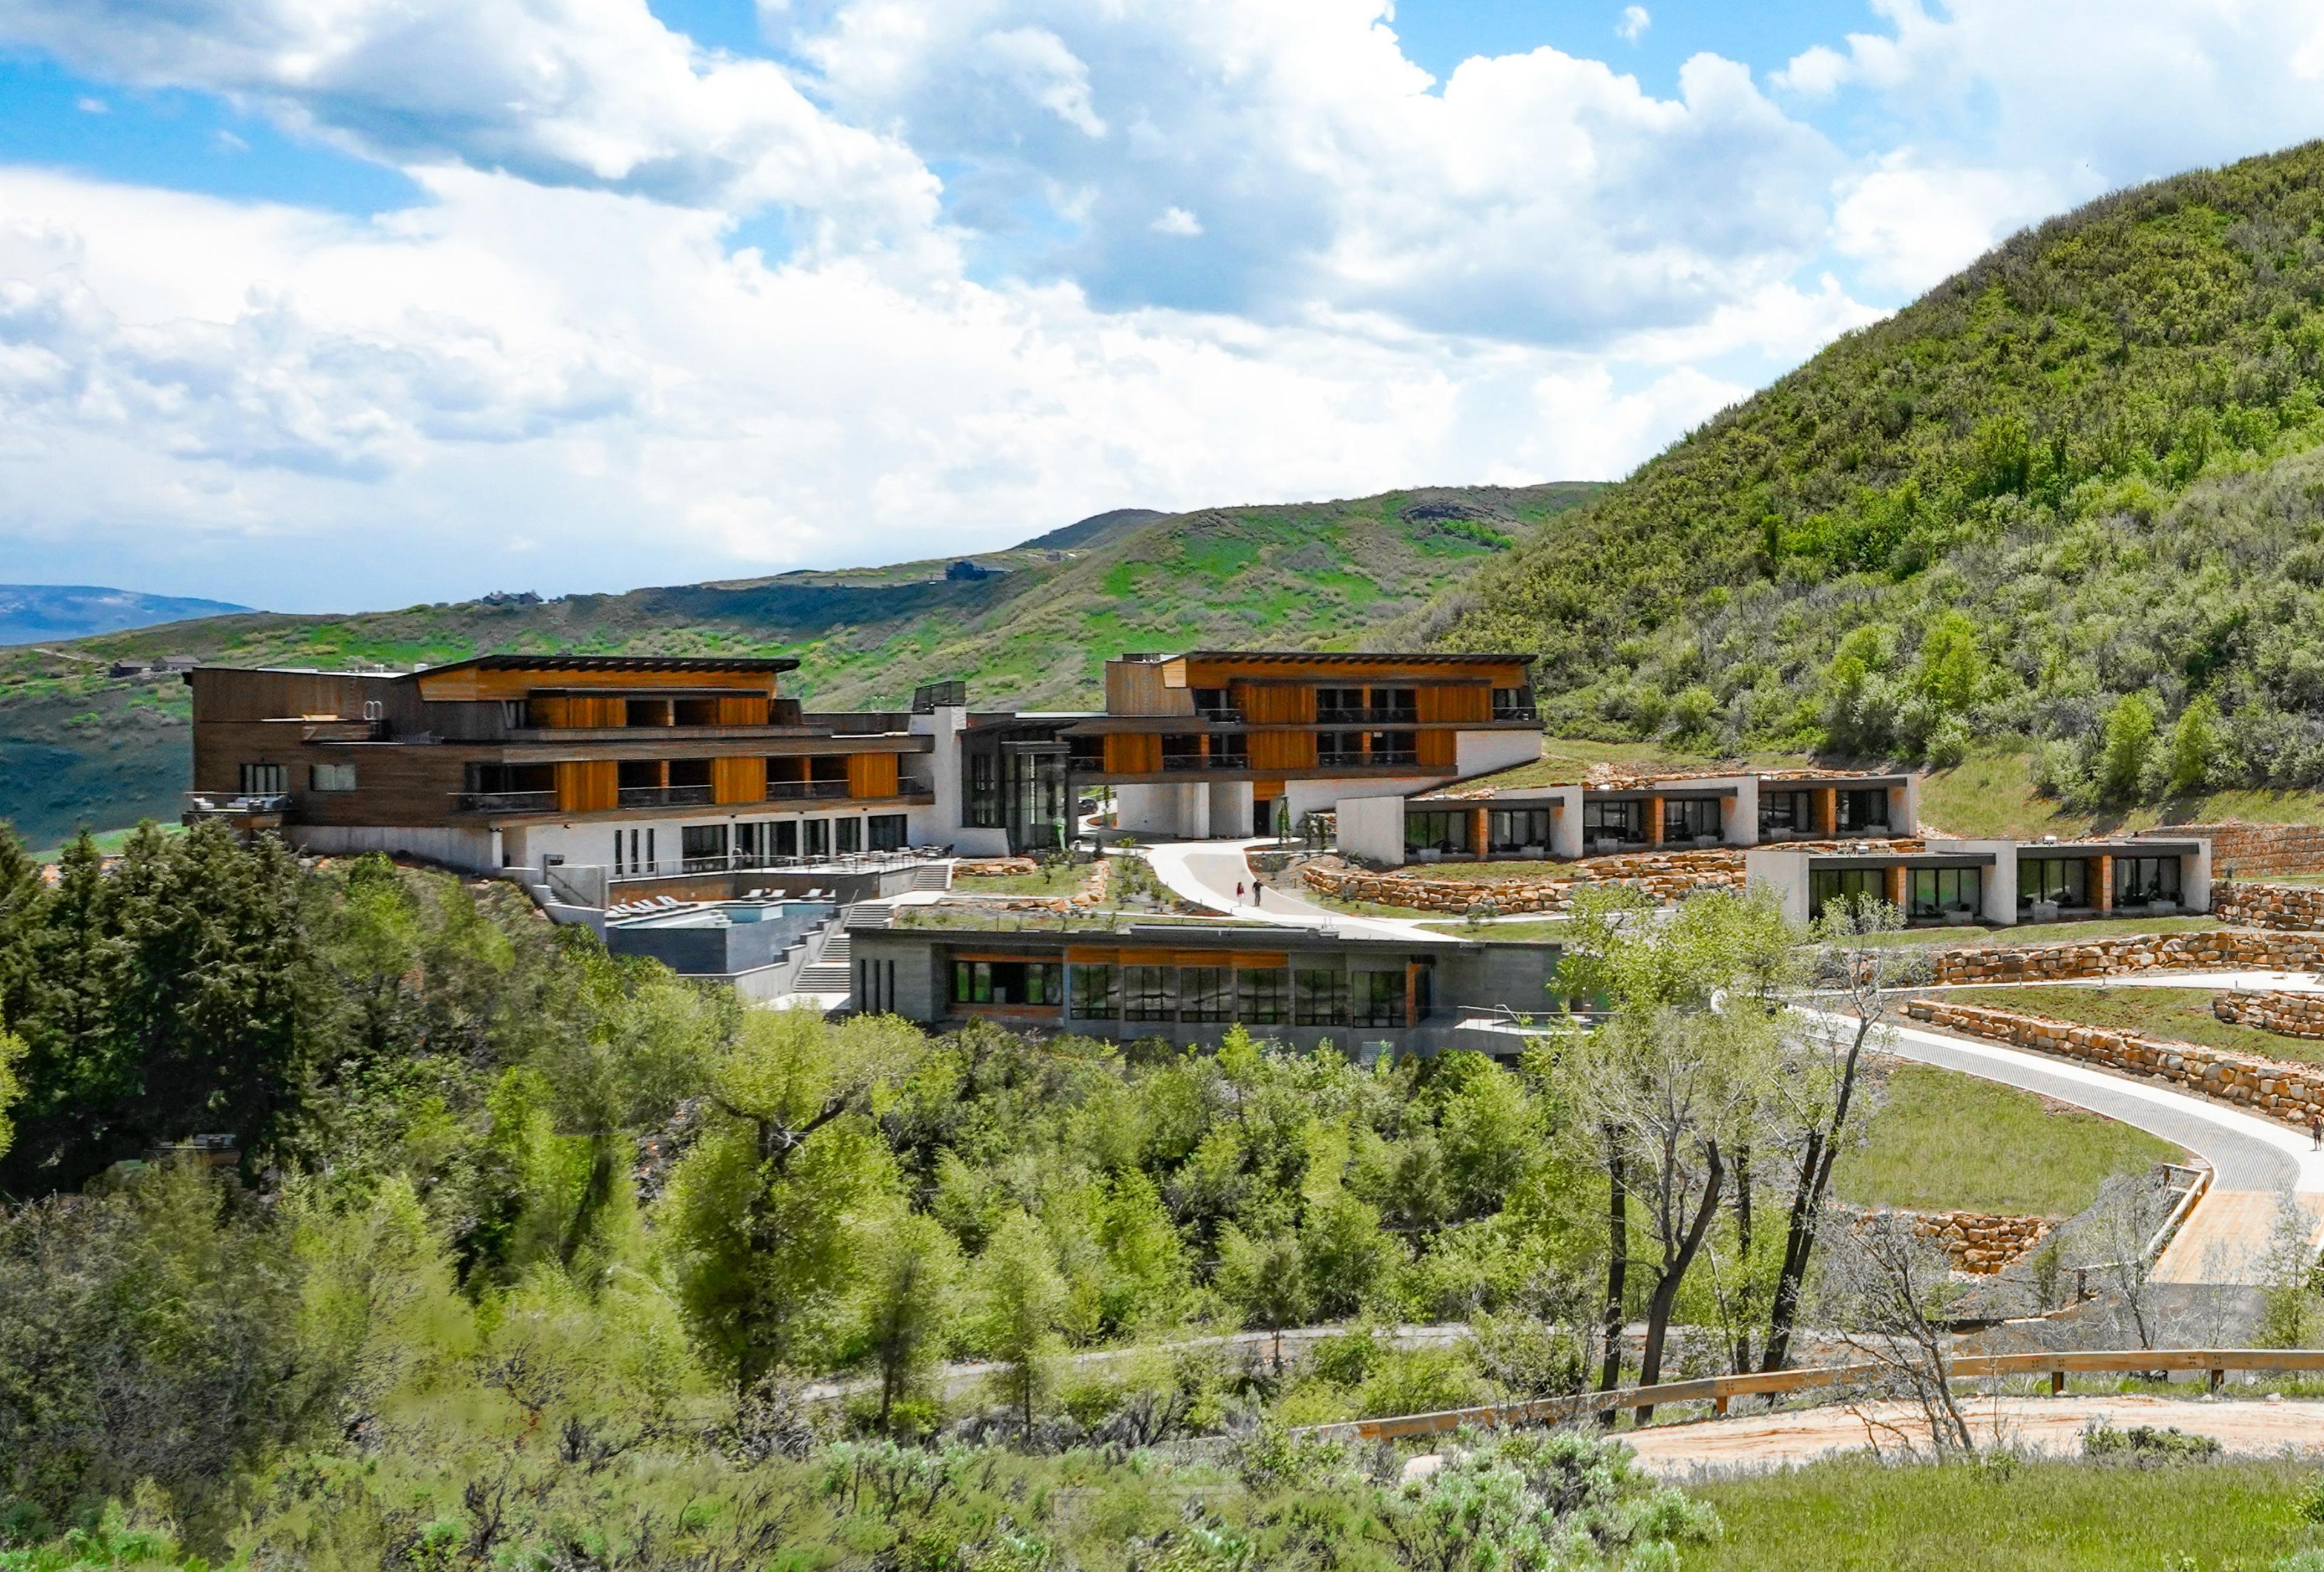 The Lodge at Blue Sky, Auberge Resorts Collection